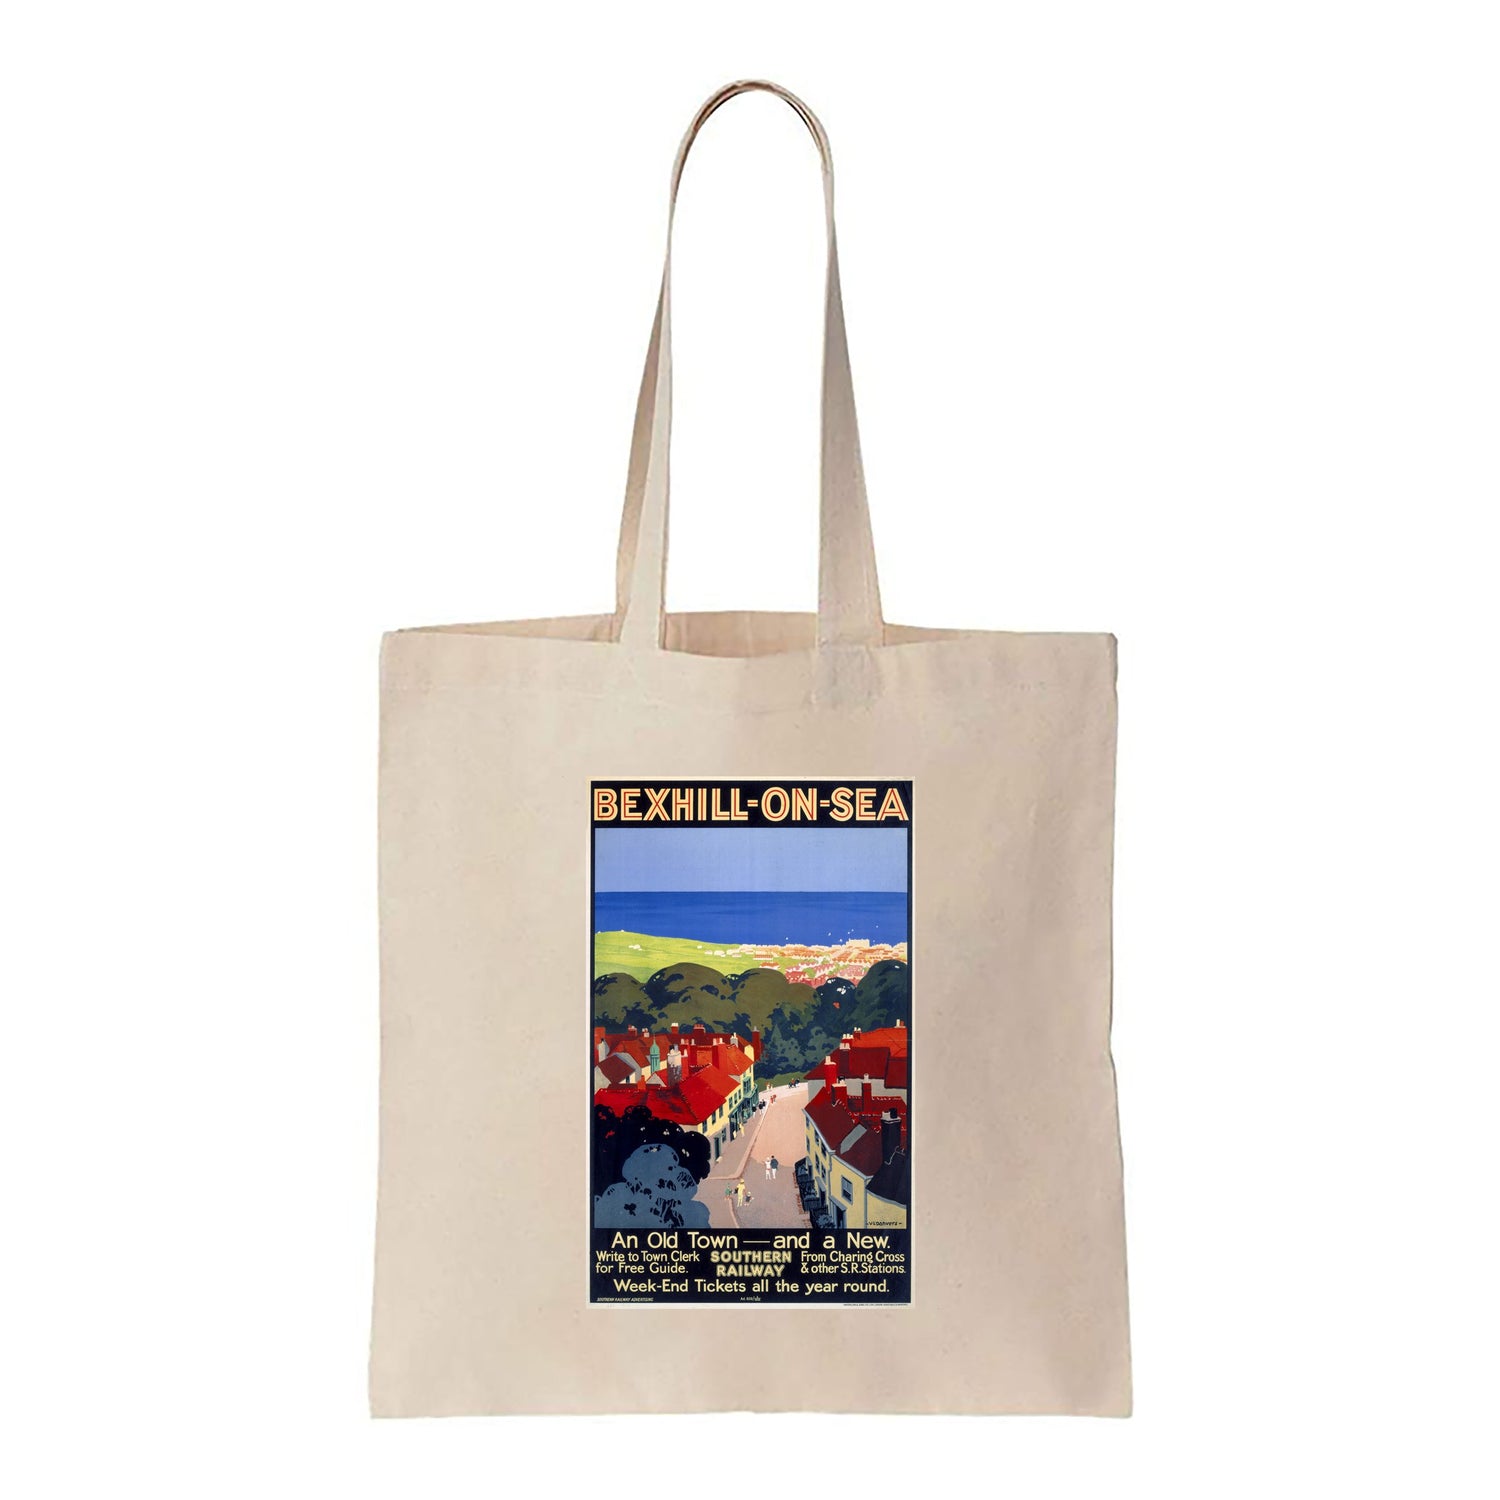 Bexhill-On-Sea - An Old Town and a New - Canvas Tote Bag